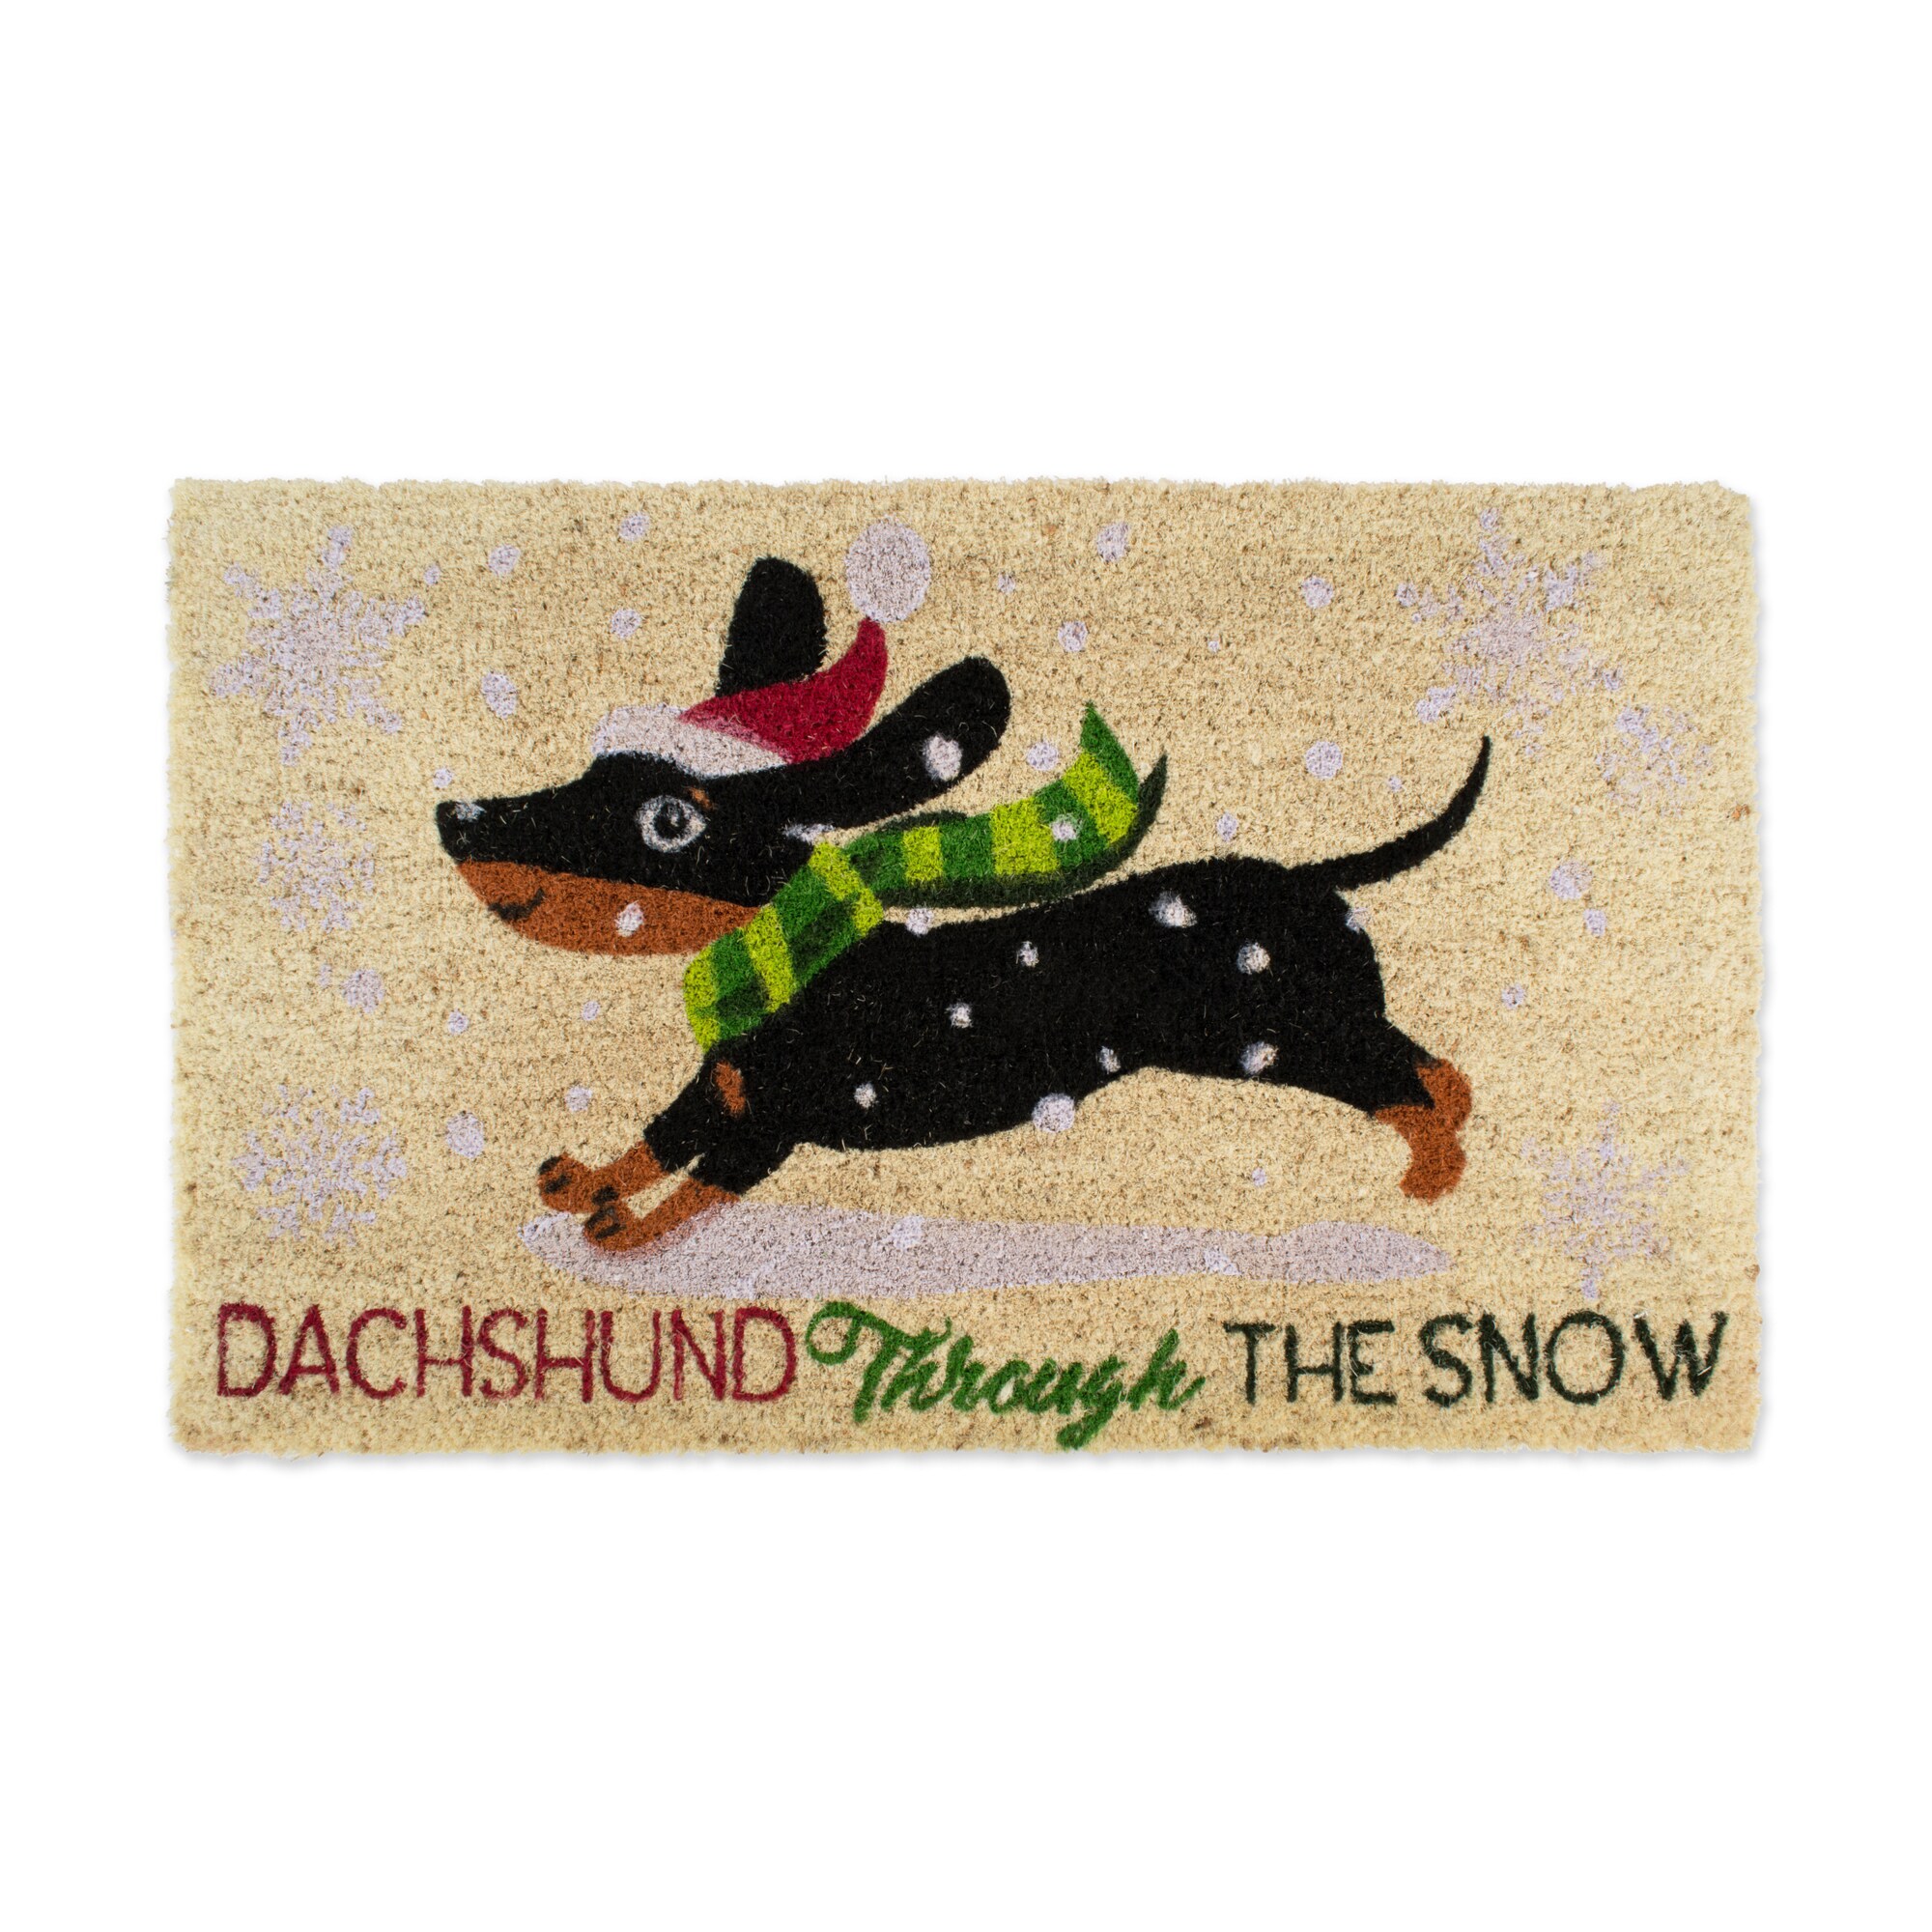 Welcome to our Patch Outdoor Door Mat - Laural Home